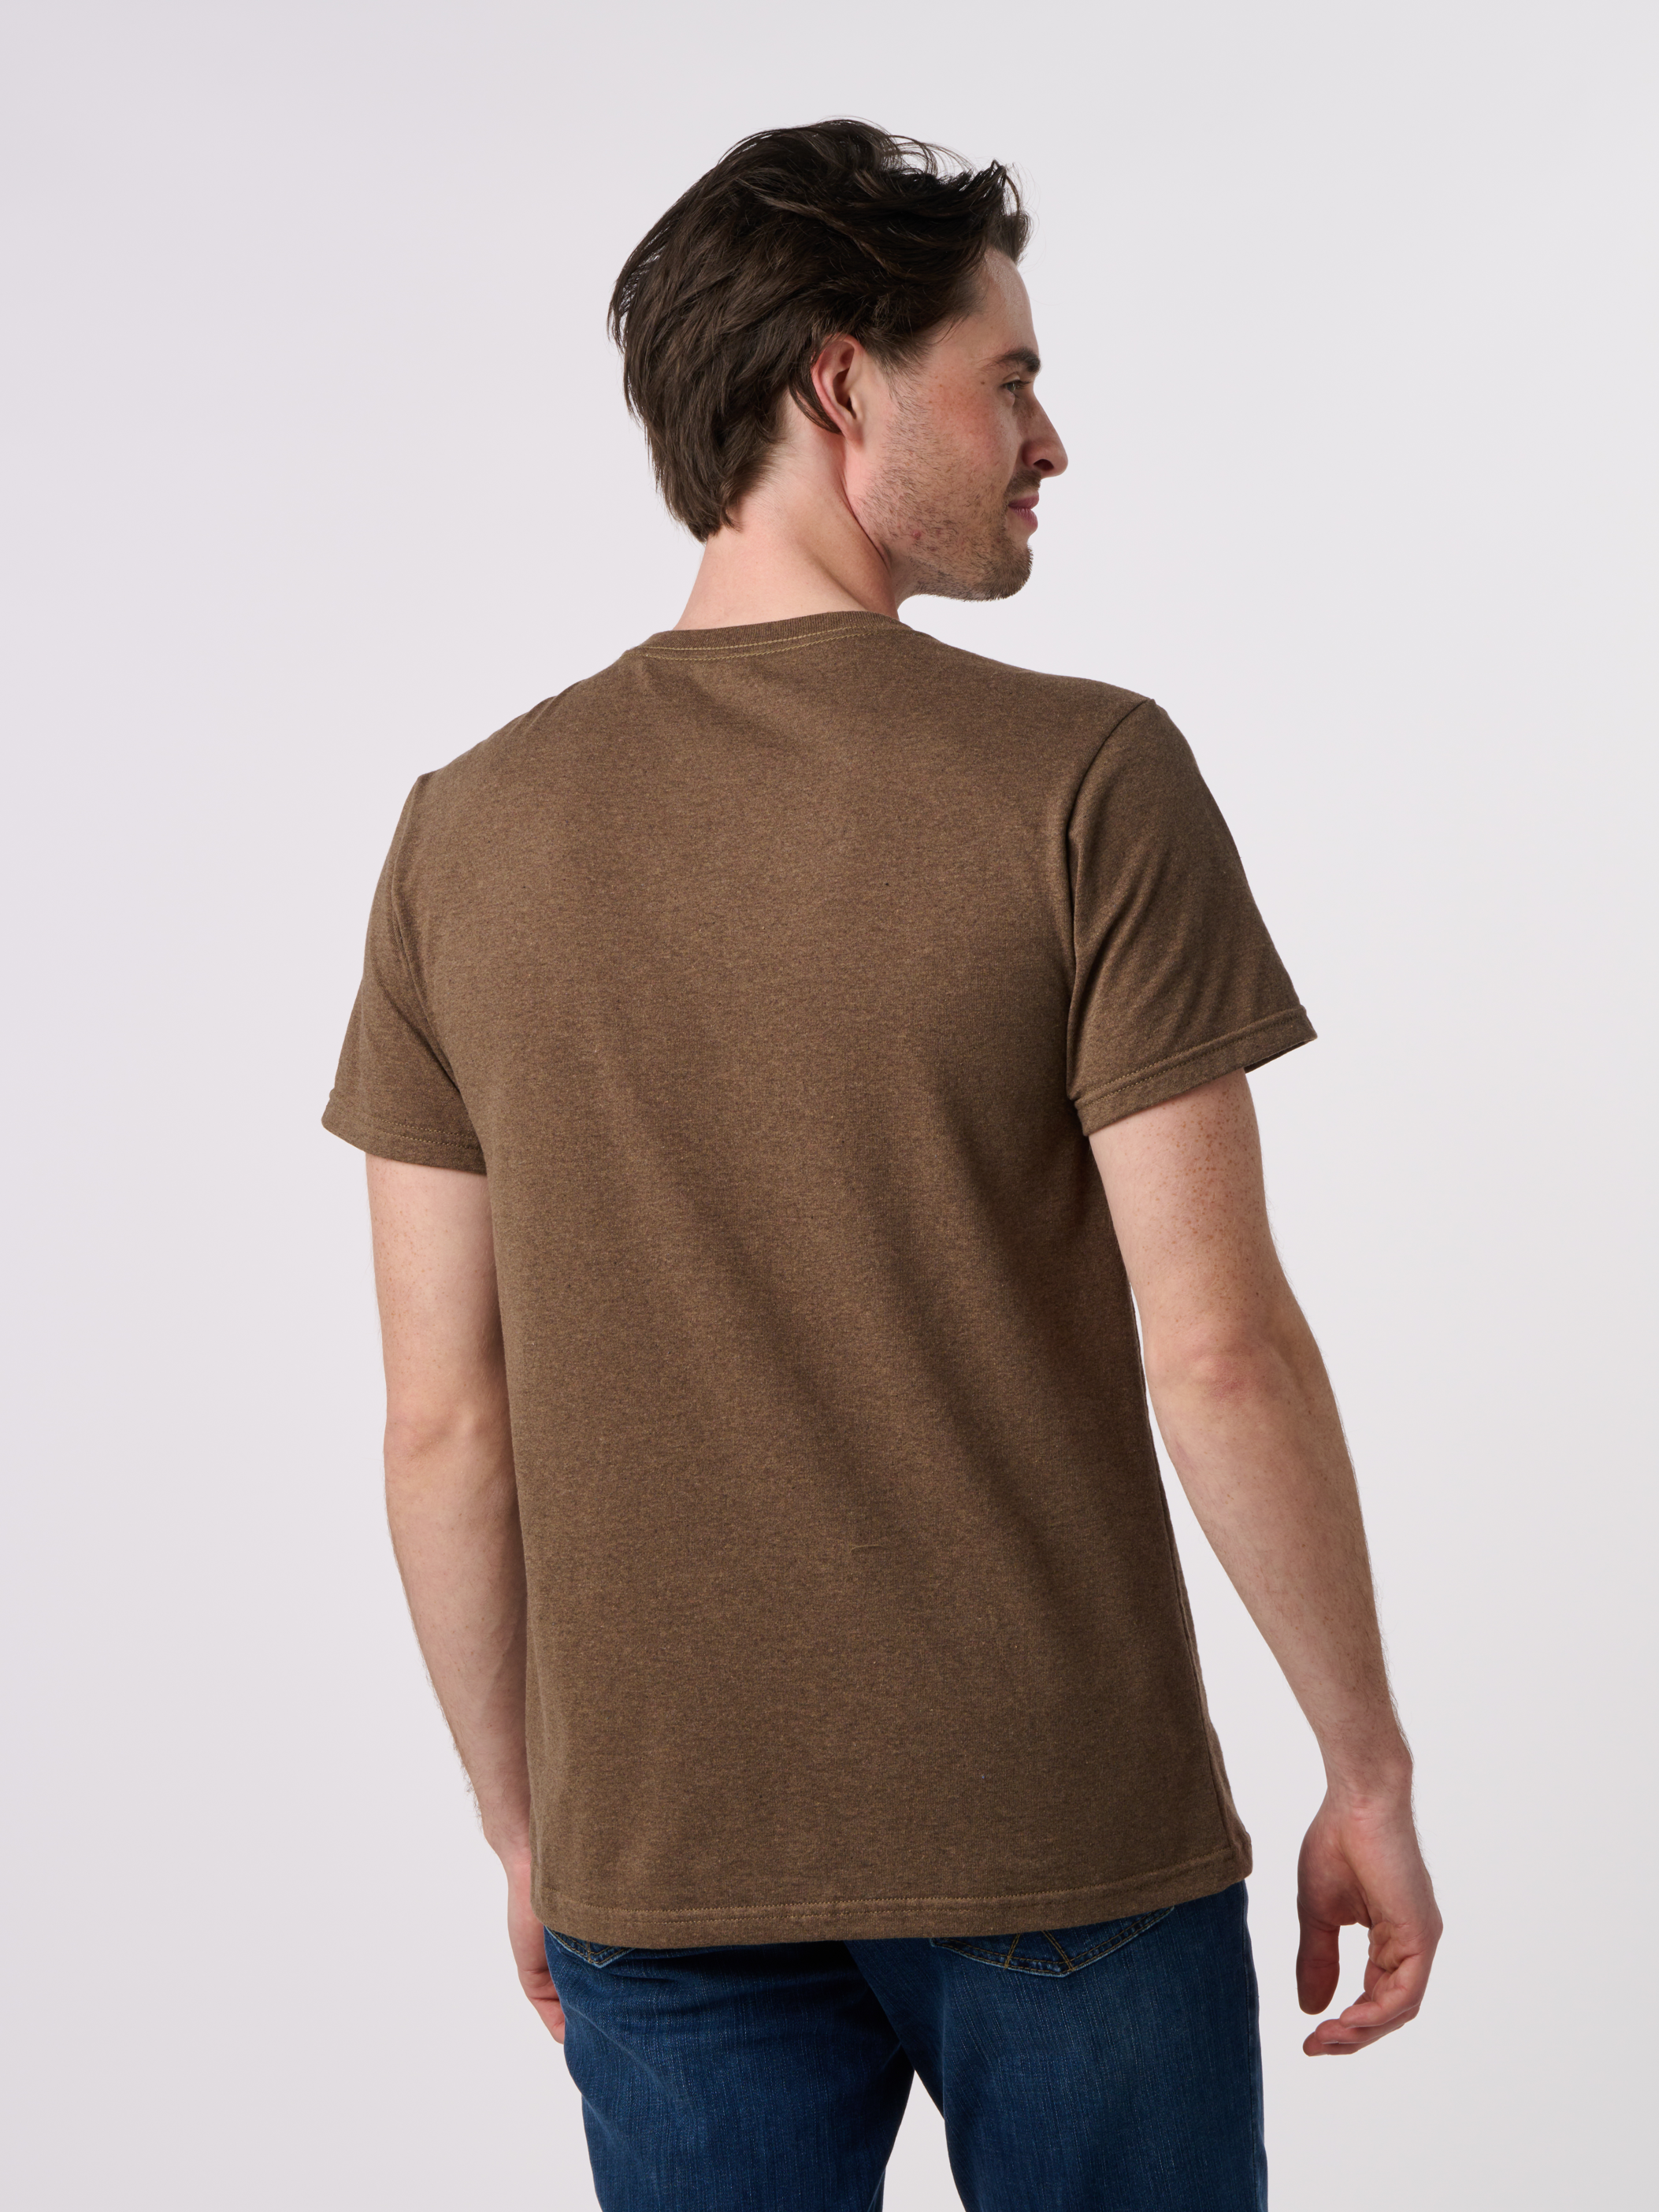 RECOVER_RS100_CLASSICSHORTSLEEVETSHIRT_BETTERBROWN_BACK.png